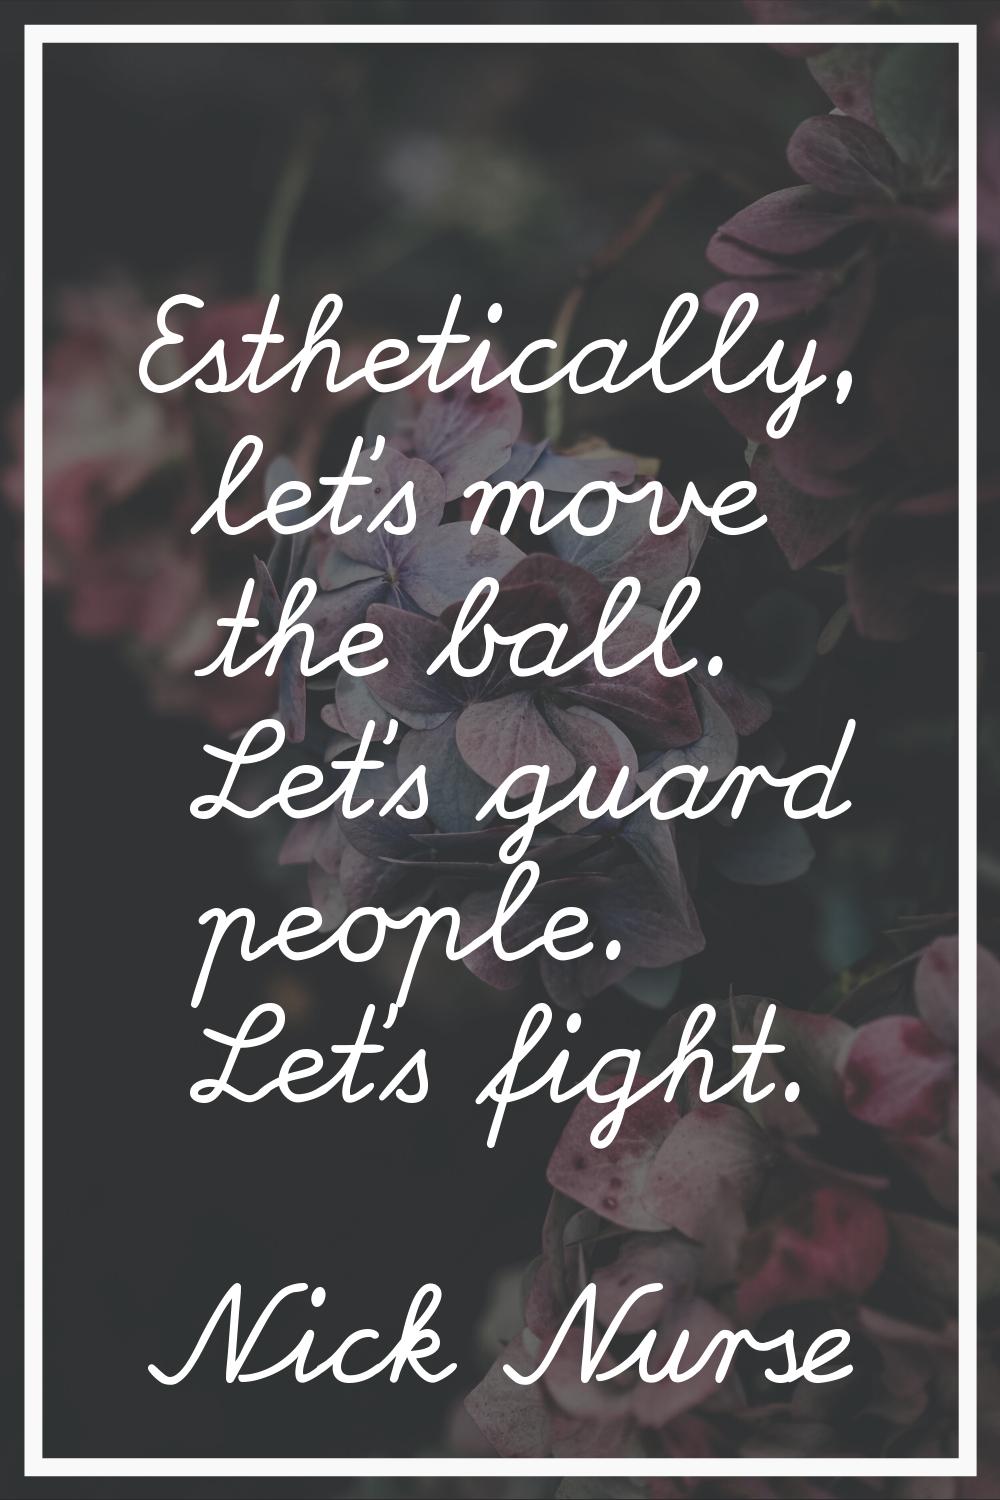 Esthetically, let's move the ball. Let's guard people. Let's fight.